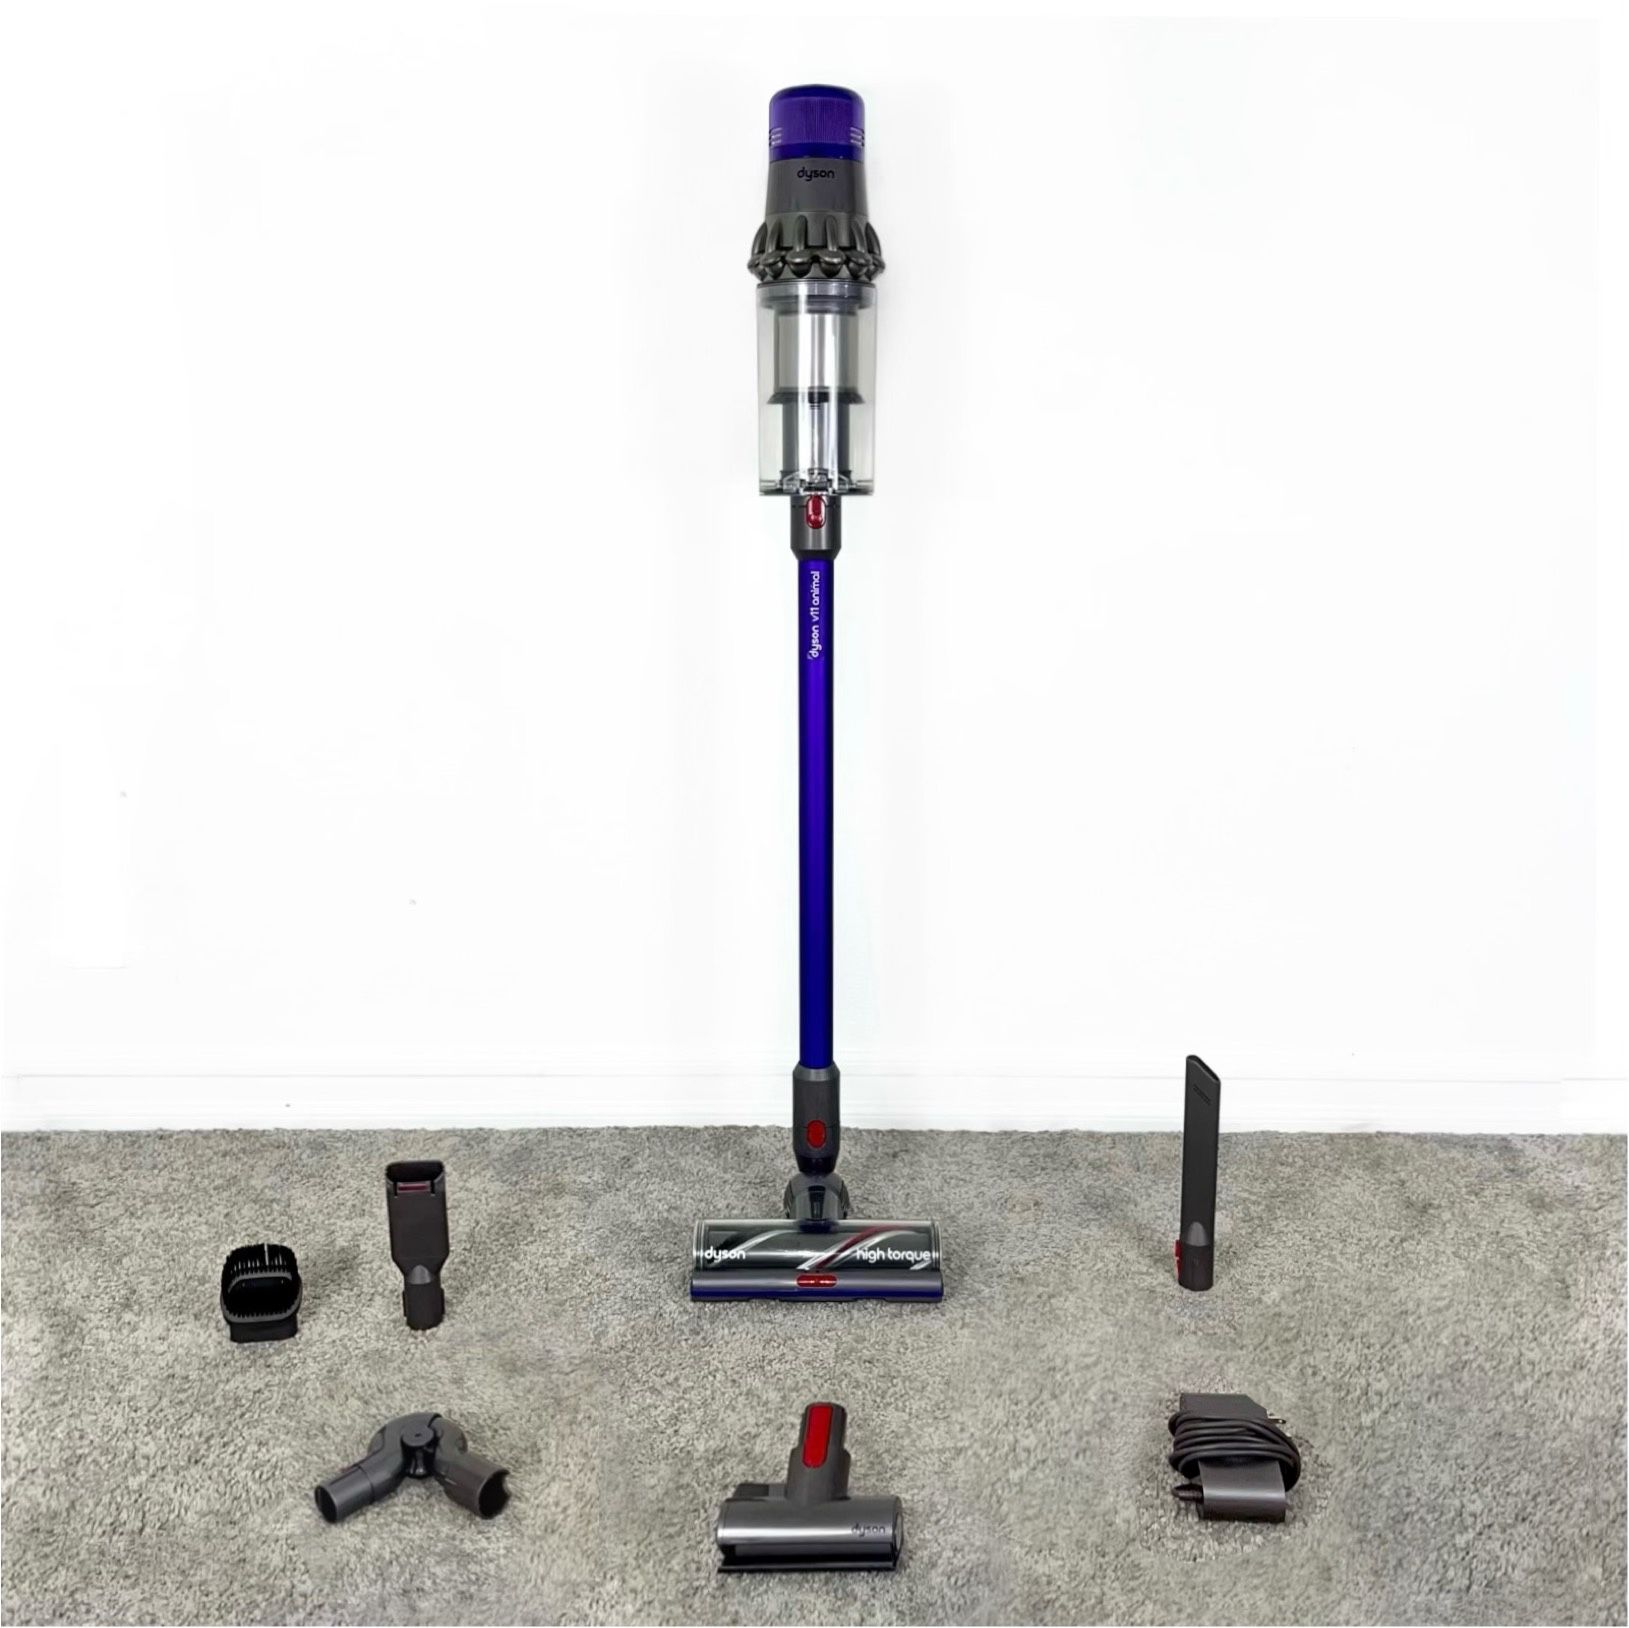 Dyson Cyclone V11 Animal + Handheld Stick Cordless Vacuum Cleaner w/ attachments 